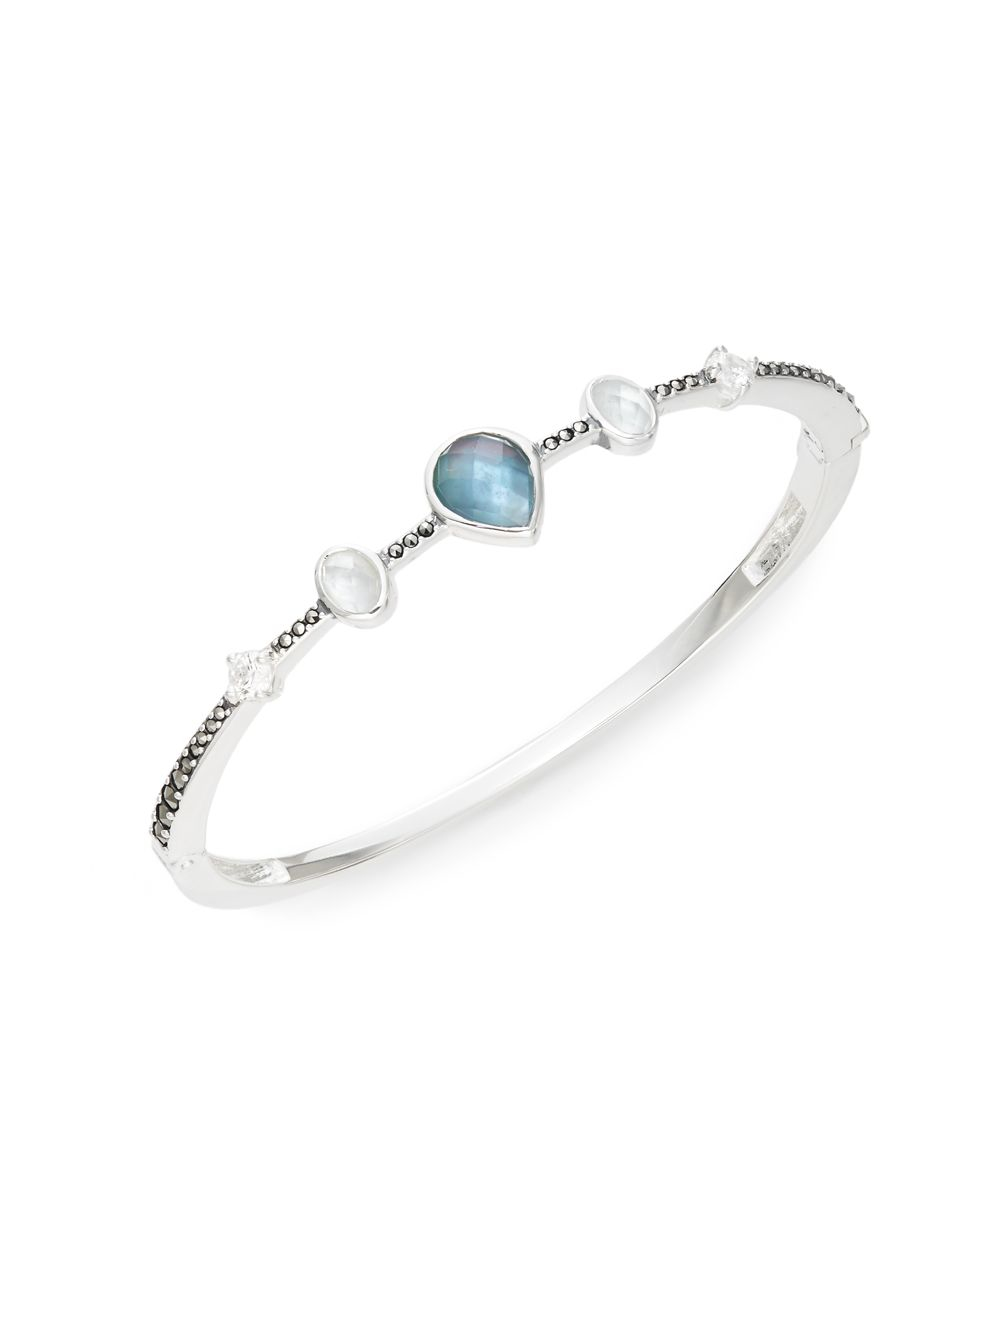 Lyst - Judith Jack Mother-of-pearl, Blue Stone & Sterling Silver Bangle ...